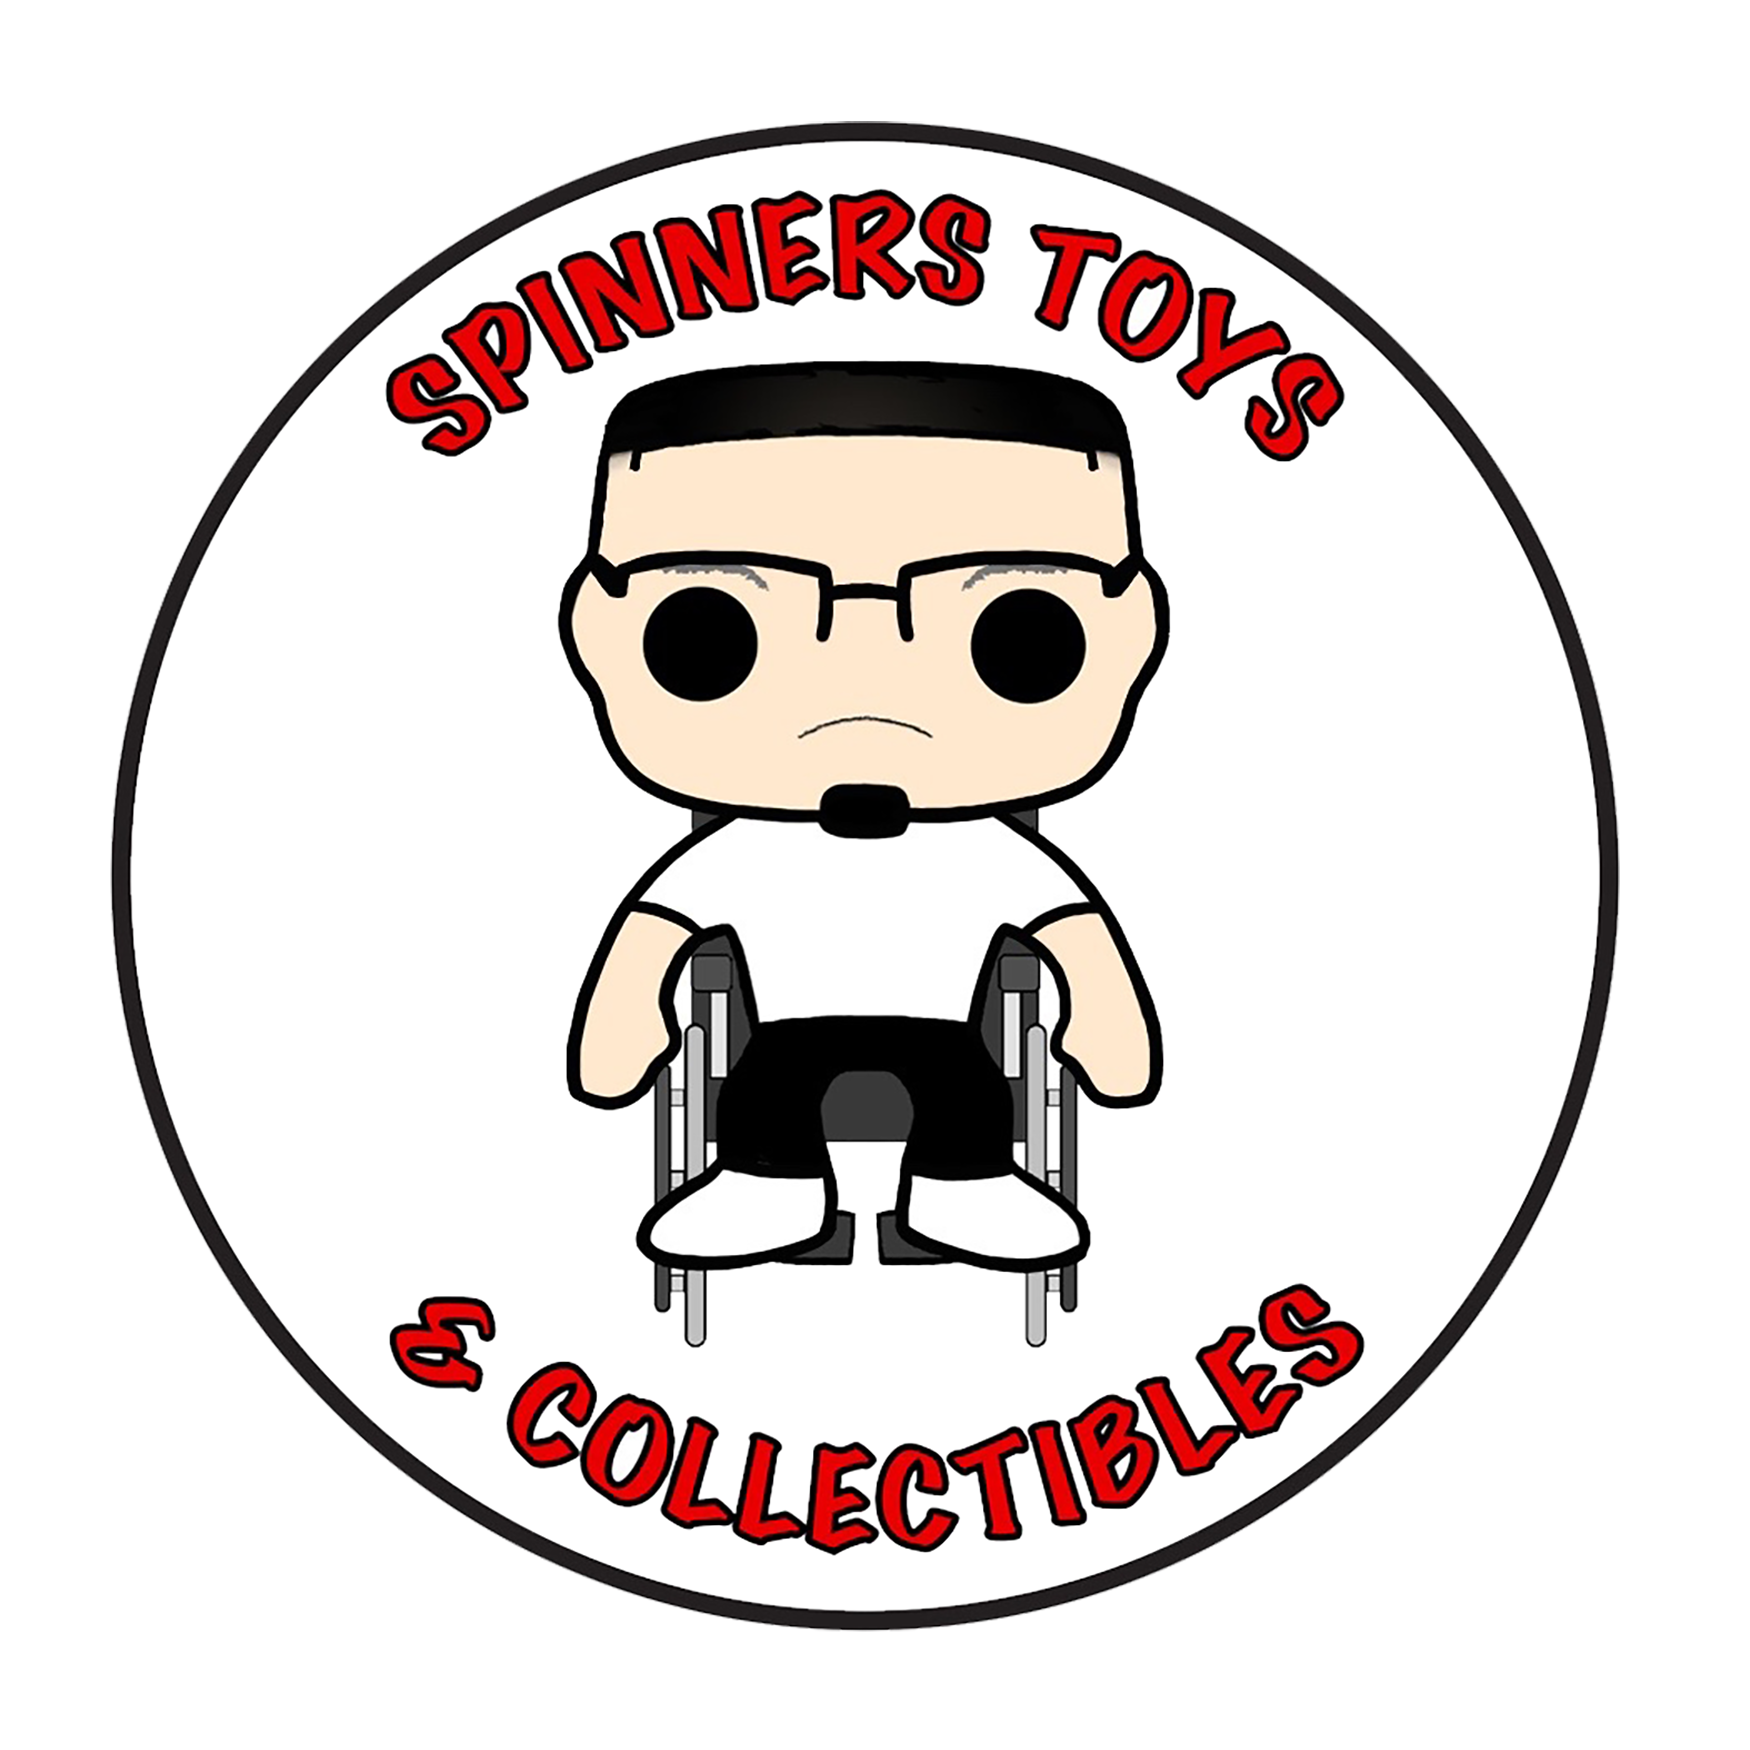 Spinners Toys & Collectibles